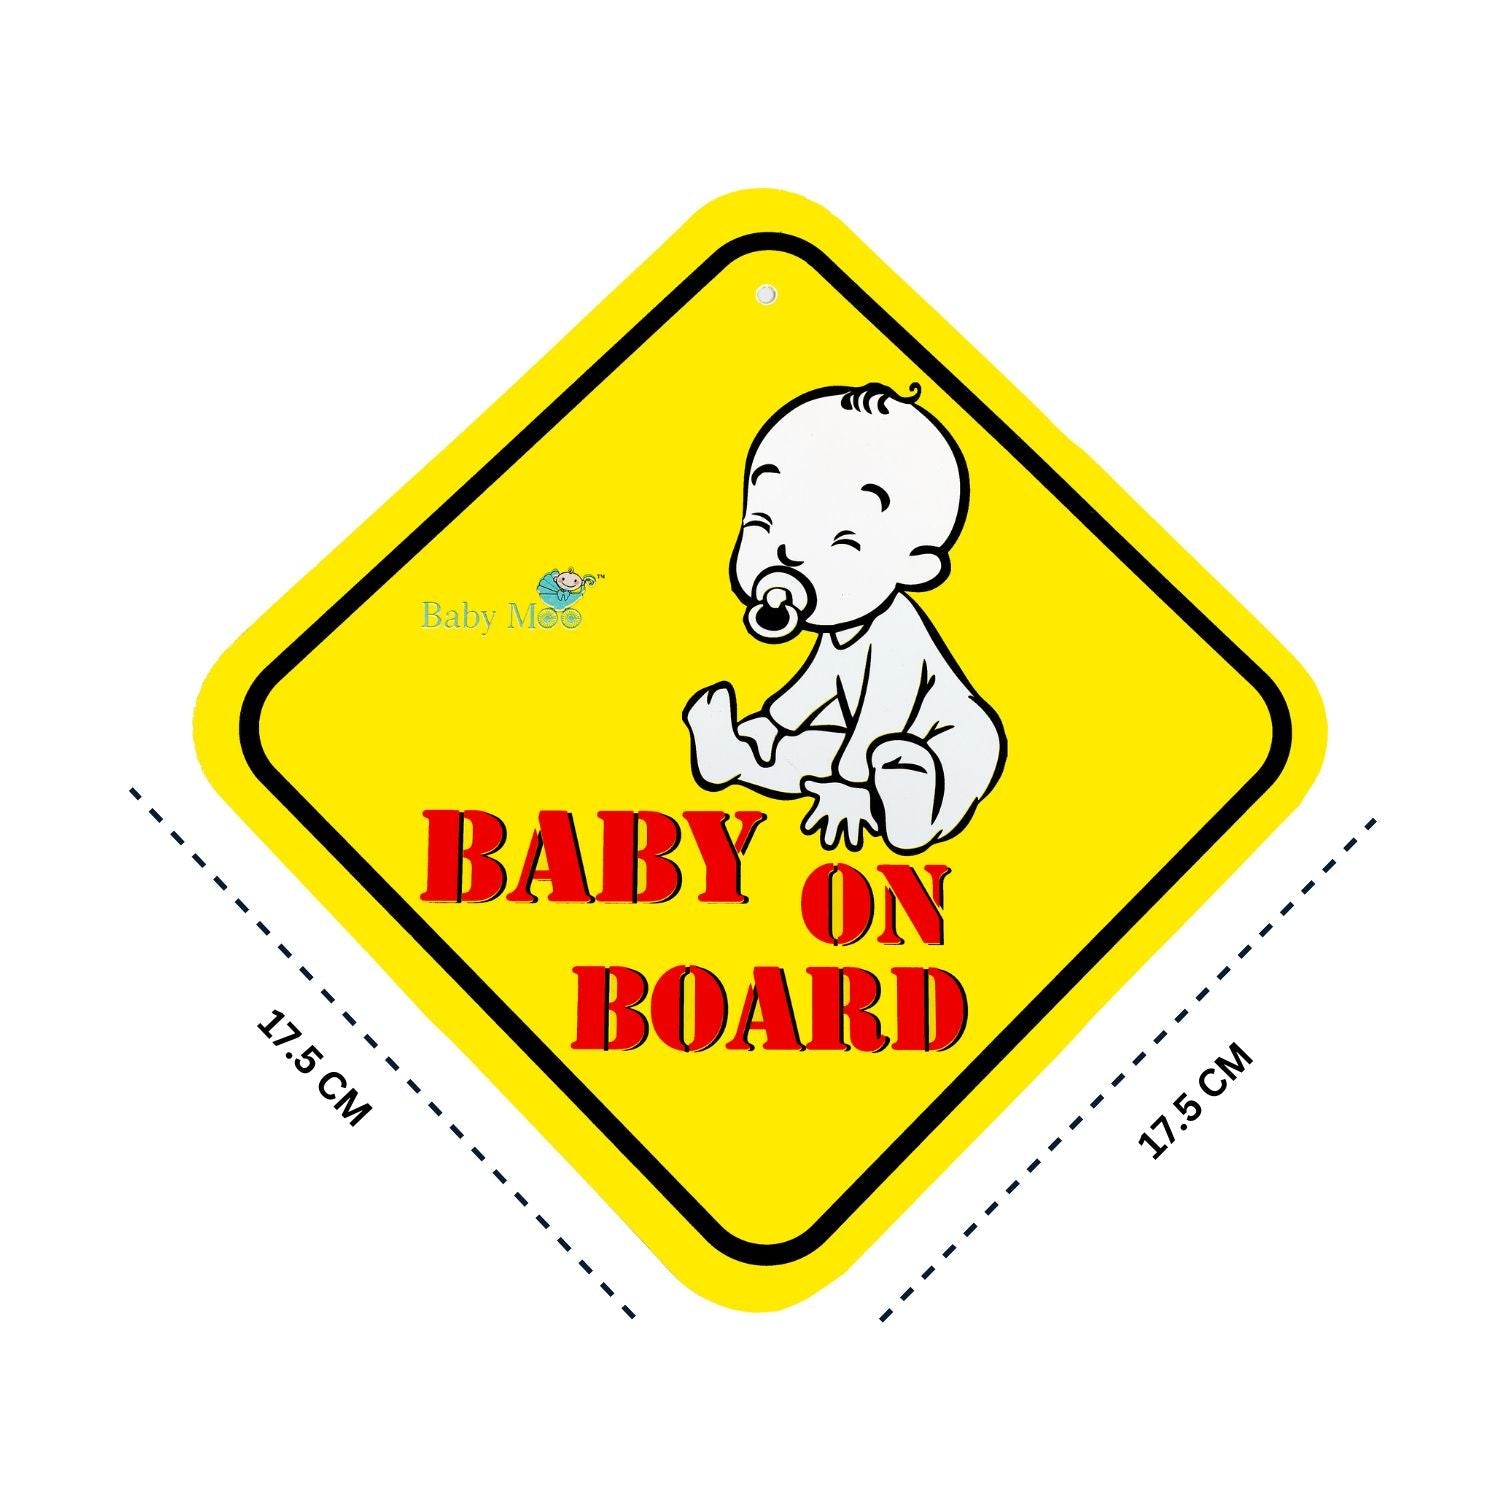 Baby Moo Car Safety Sign Little Baby On Board With Vacuum Suction Cup Clip - Yellow